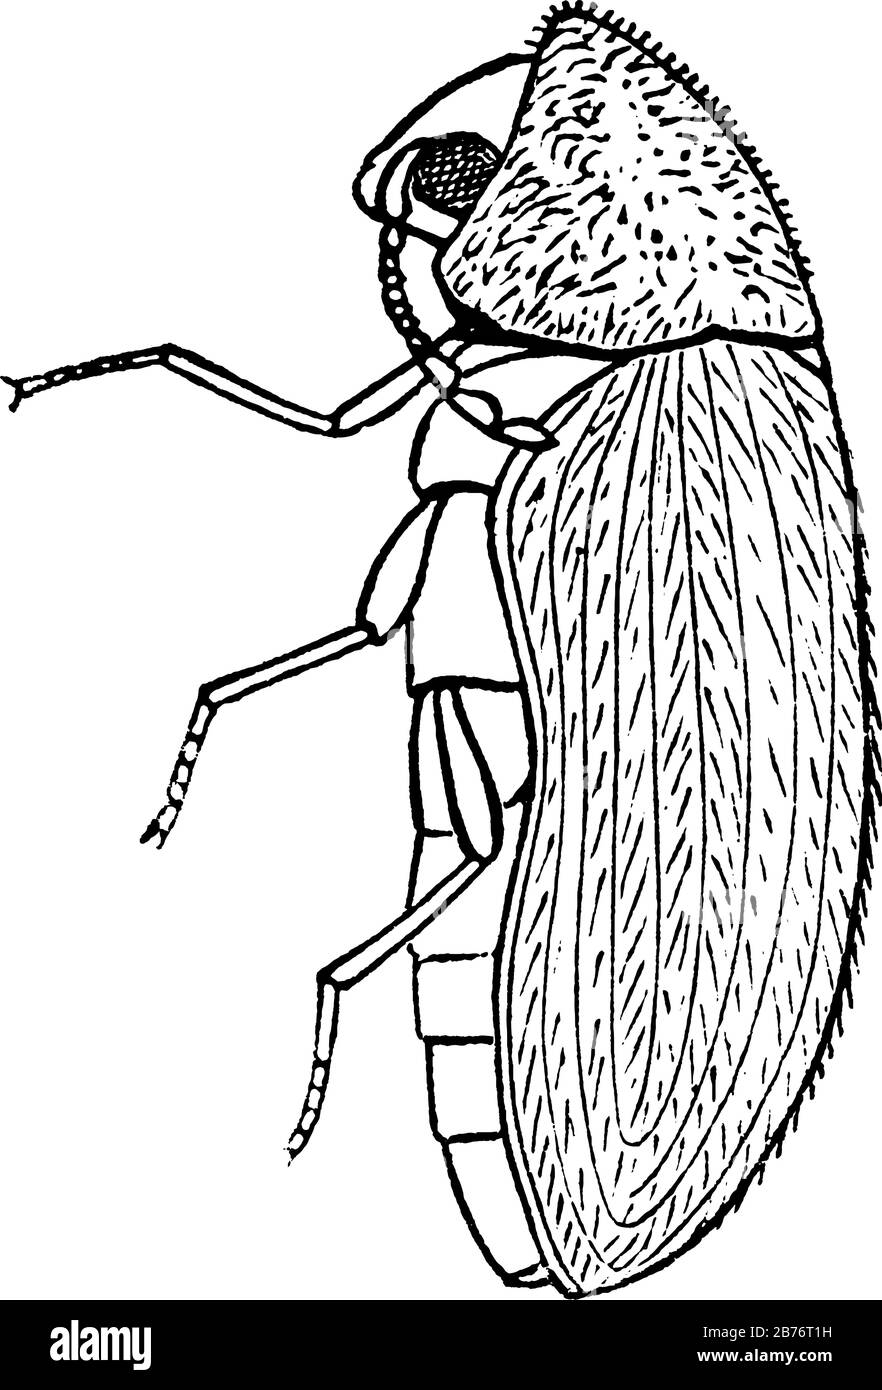 The adult of the drugstore beetle, side view, that have antennae ending in 3-segmented clubs, and grooves running longitudinally along the elytra, vin Stock Vector